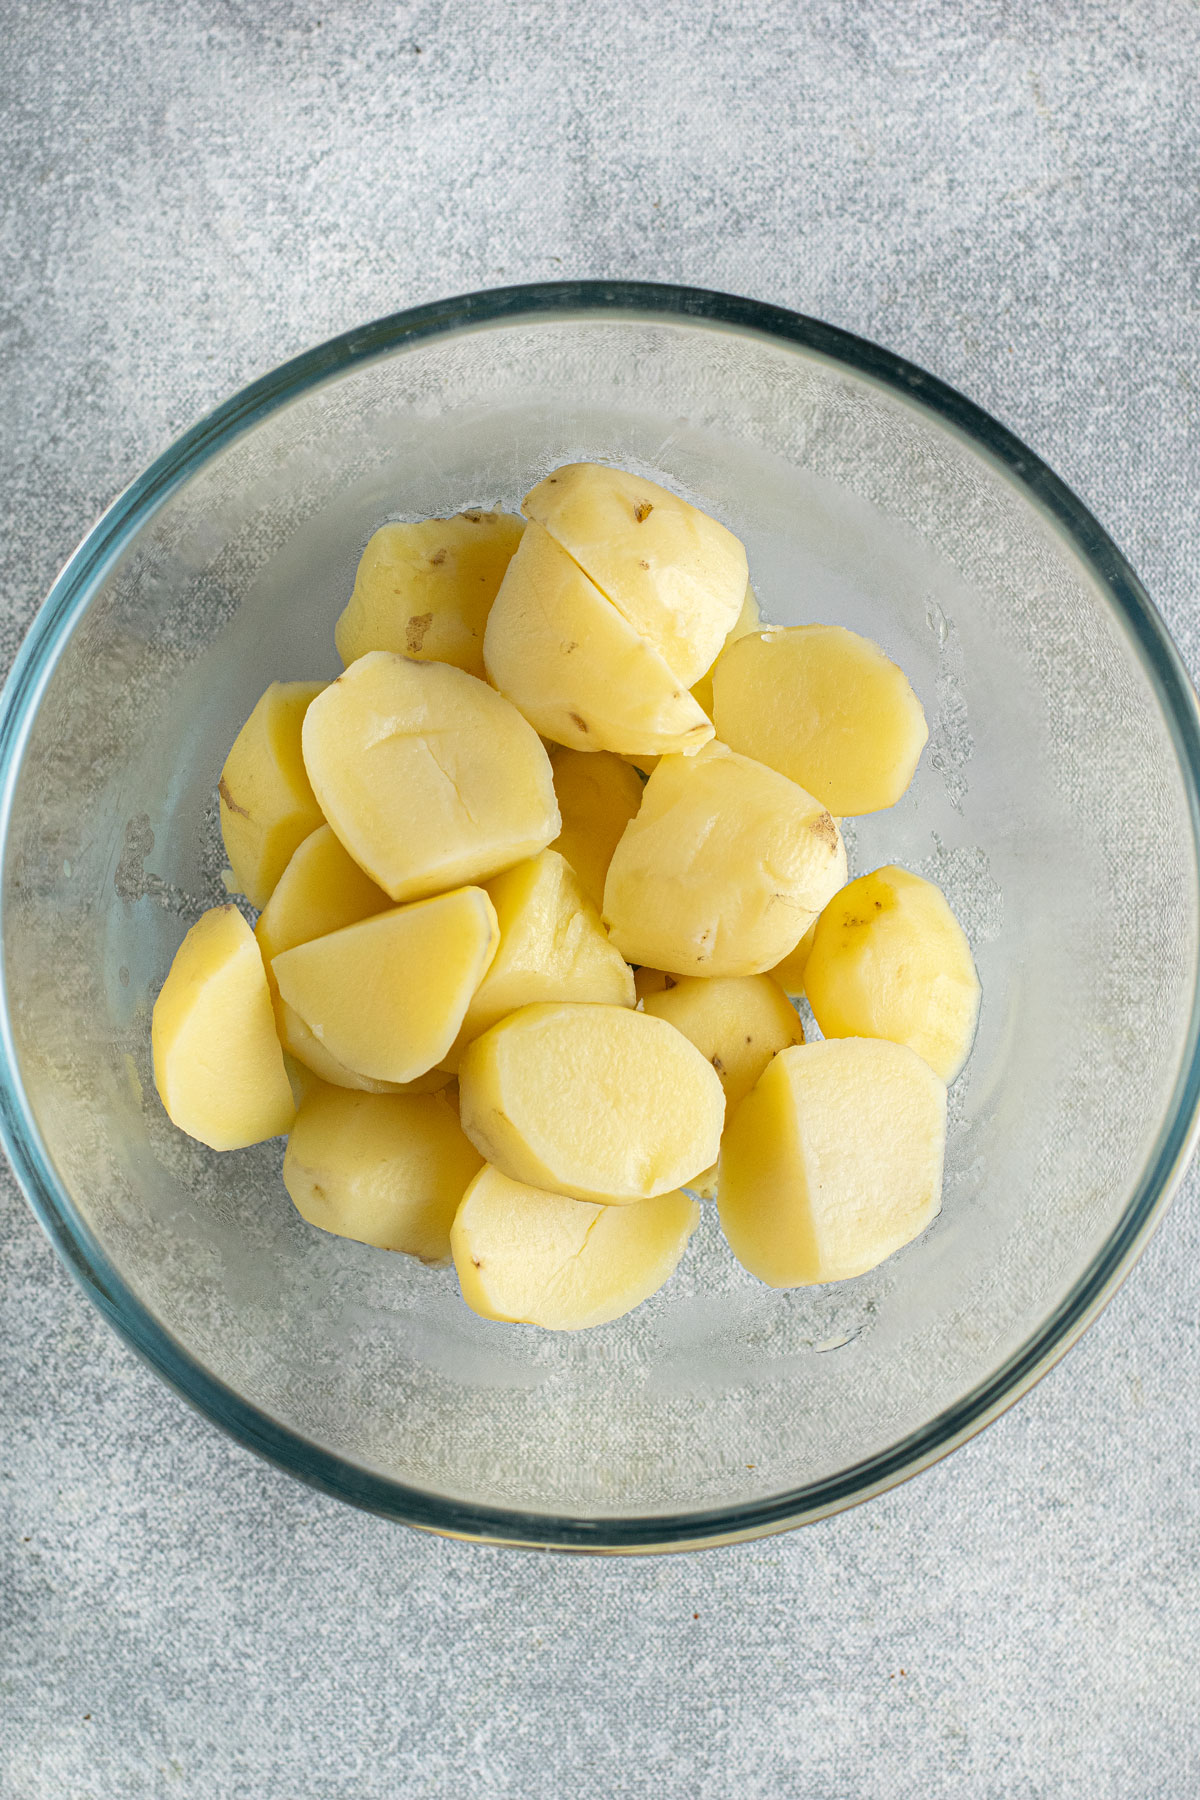 Drained boiled potatoes for Instant Pot Garlic Mashed Potatoes recipe